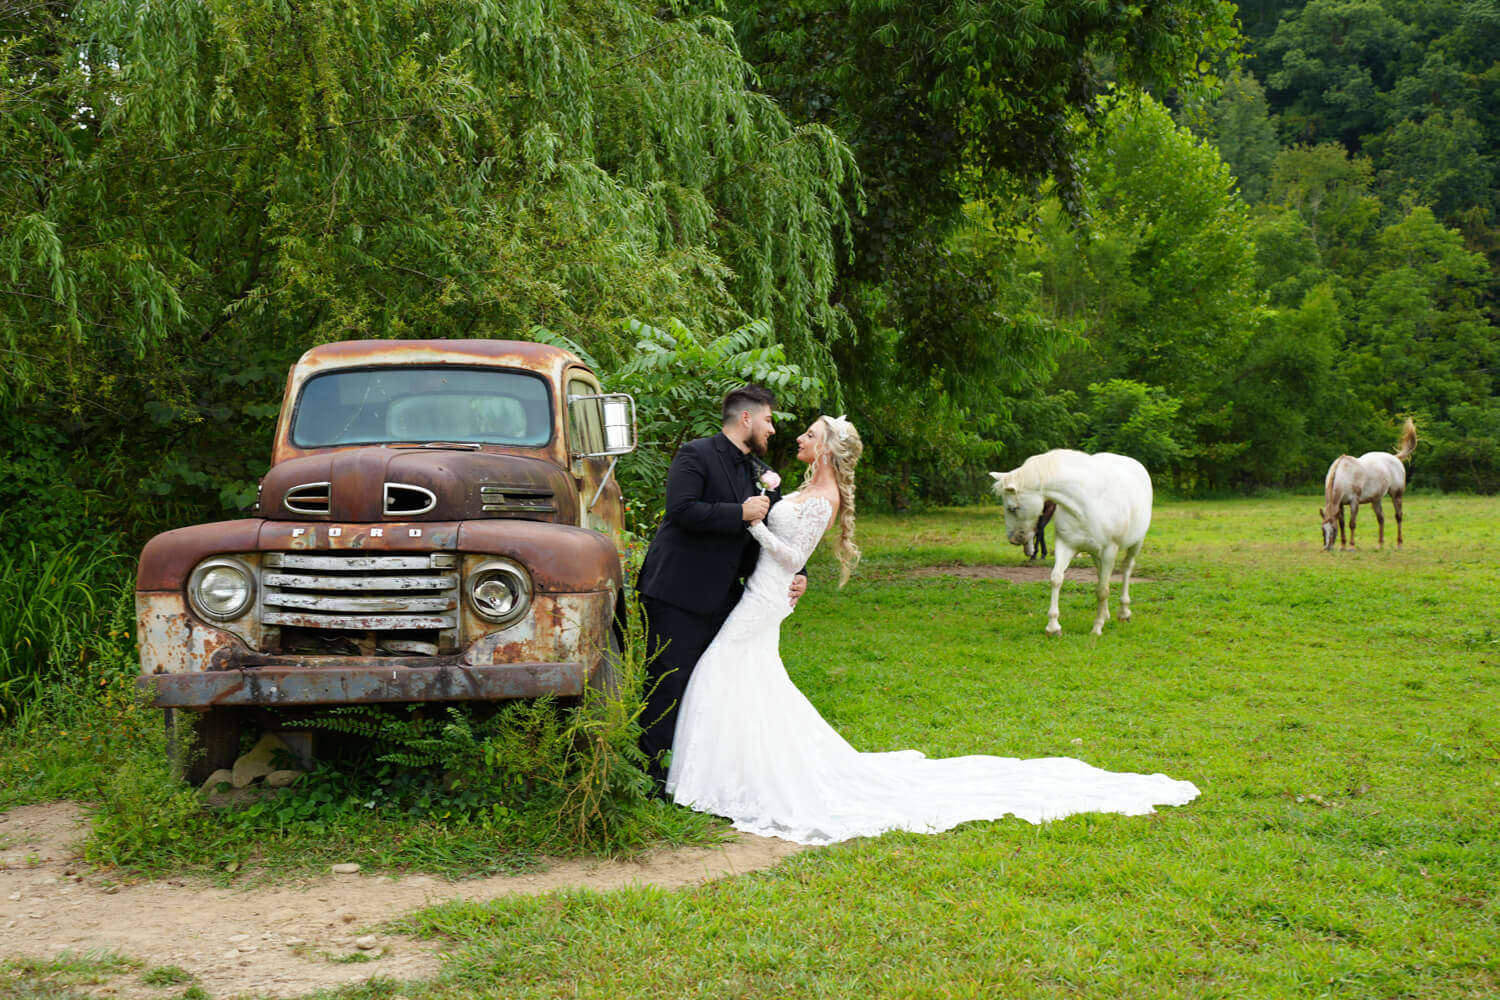 Wedding couple holding tightly by an old 1950 Ford truck in a horse field while a white appaloosa runs toward them